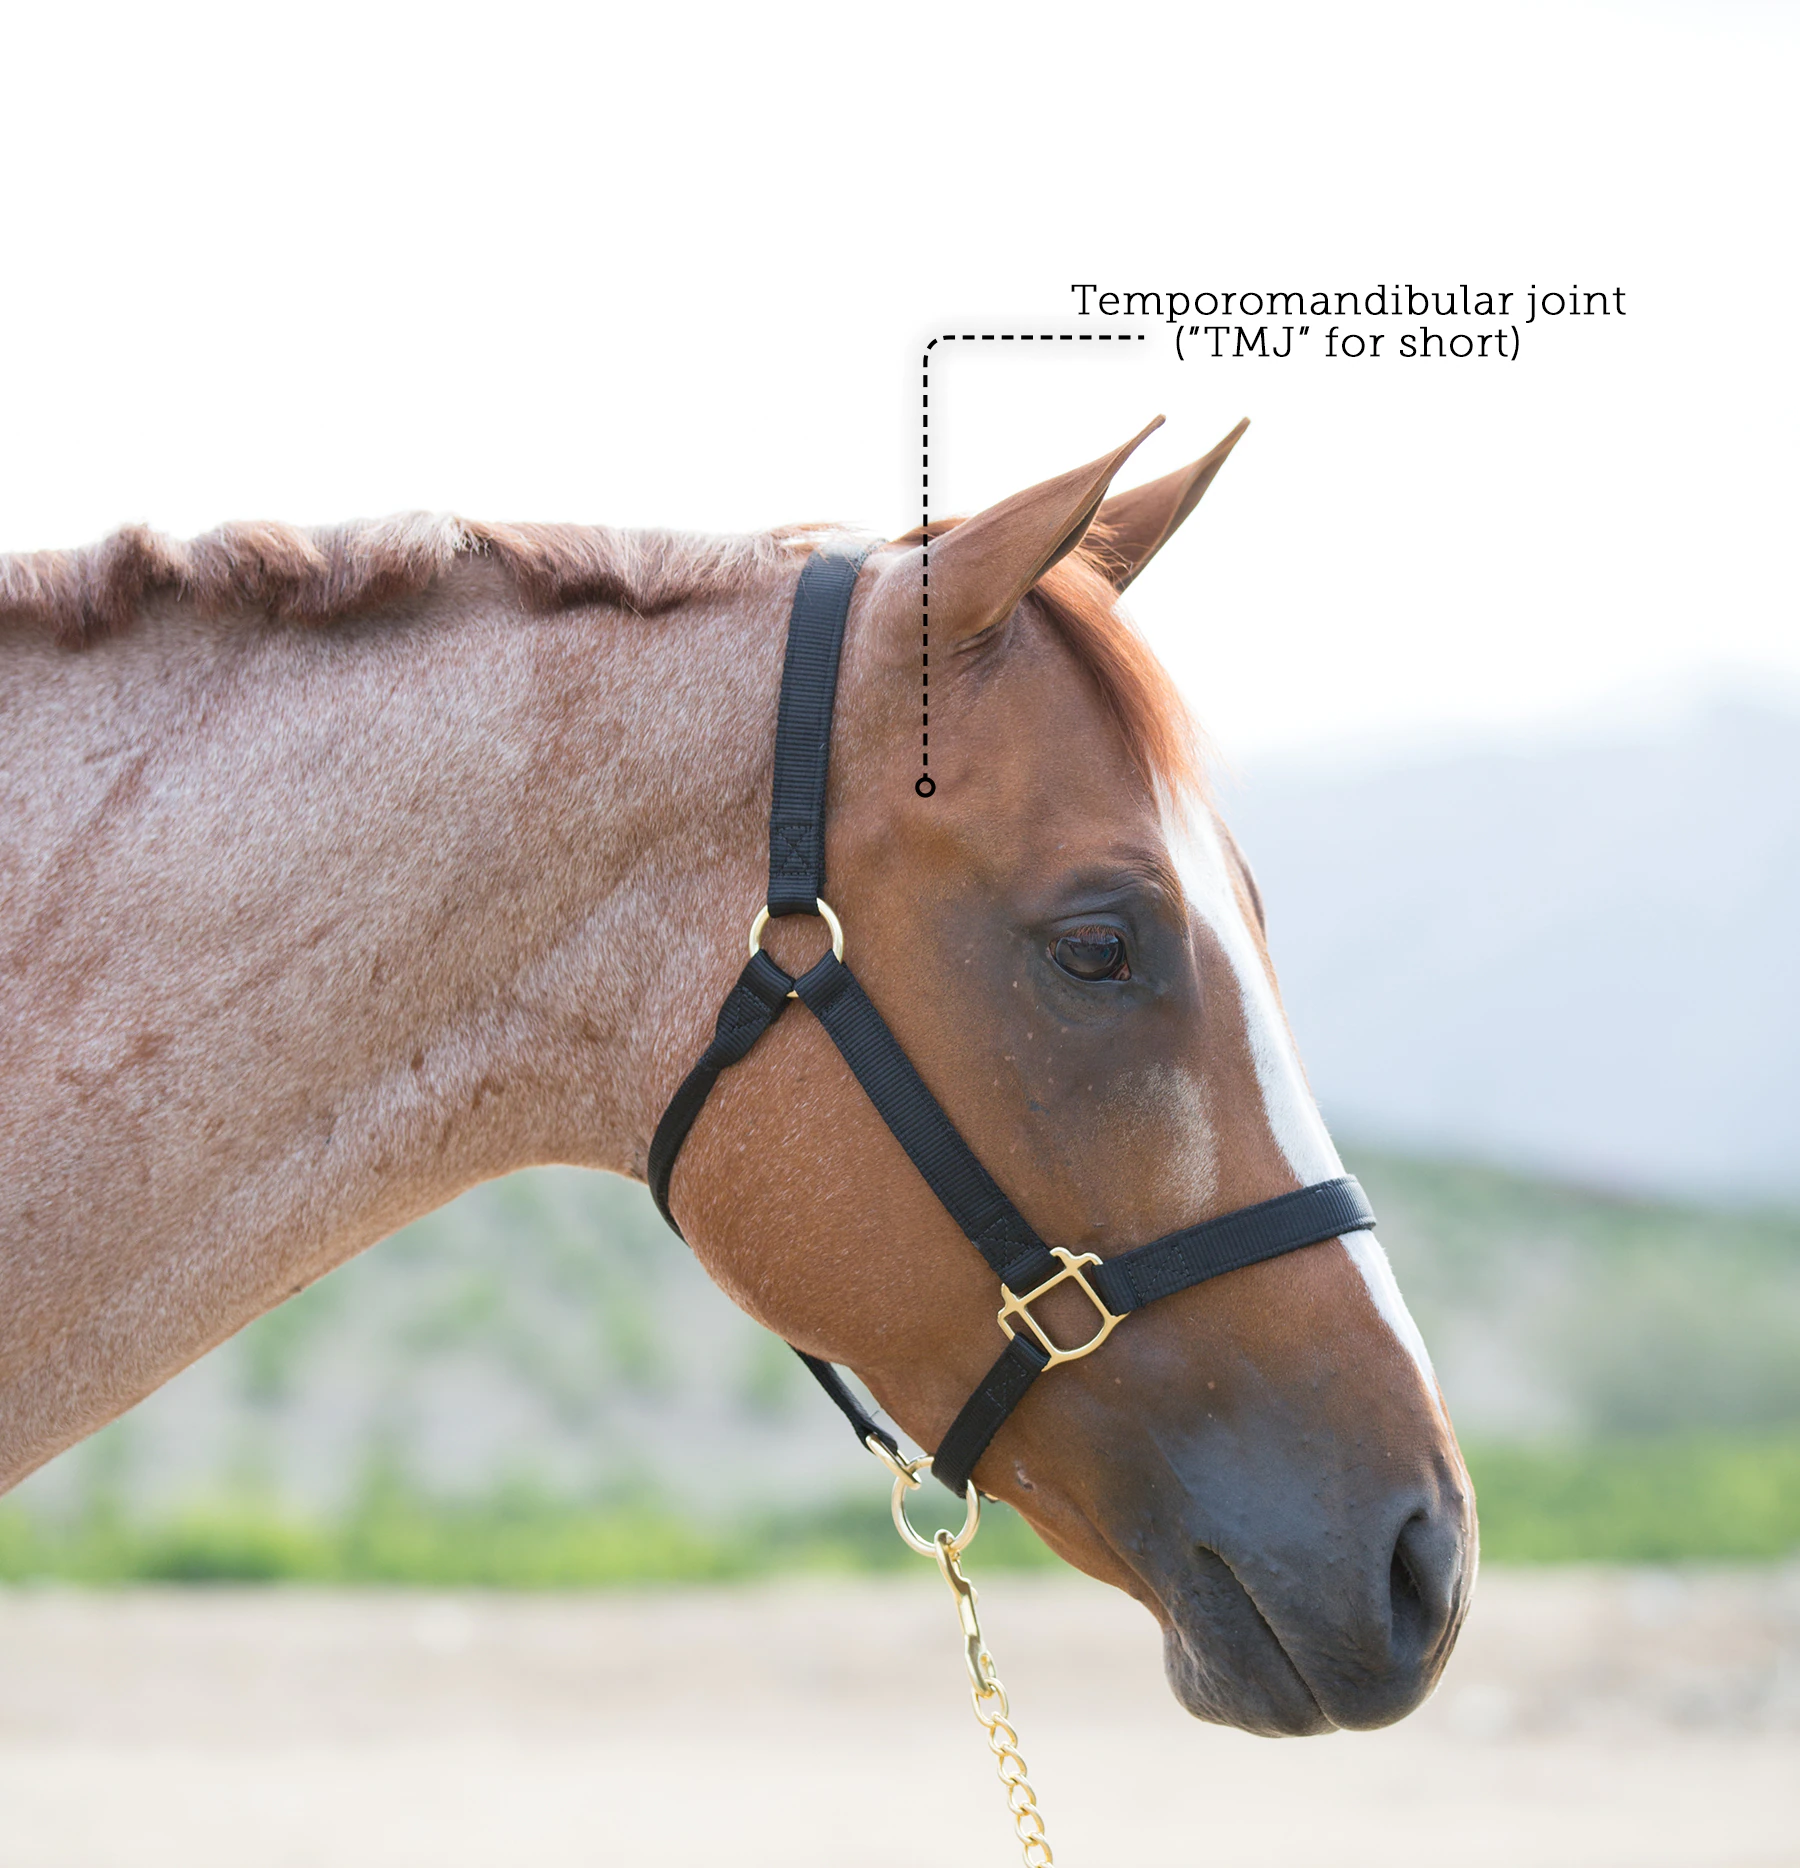 side view of a horse showing where the temporomandibular joint or TMJ is located